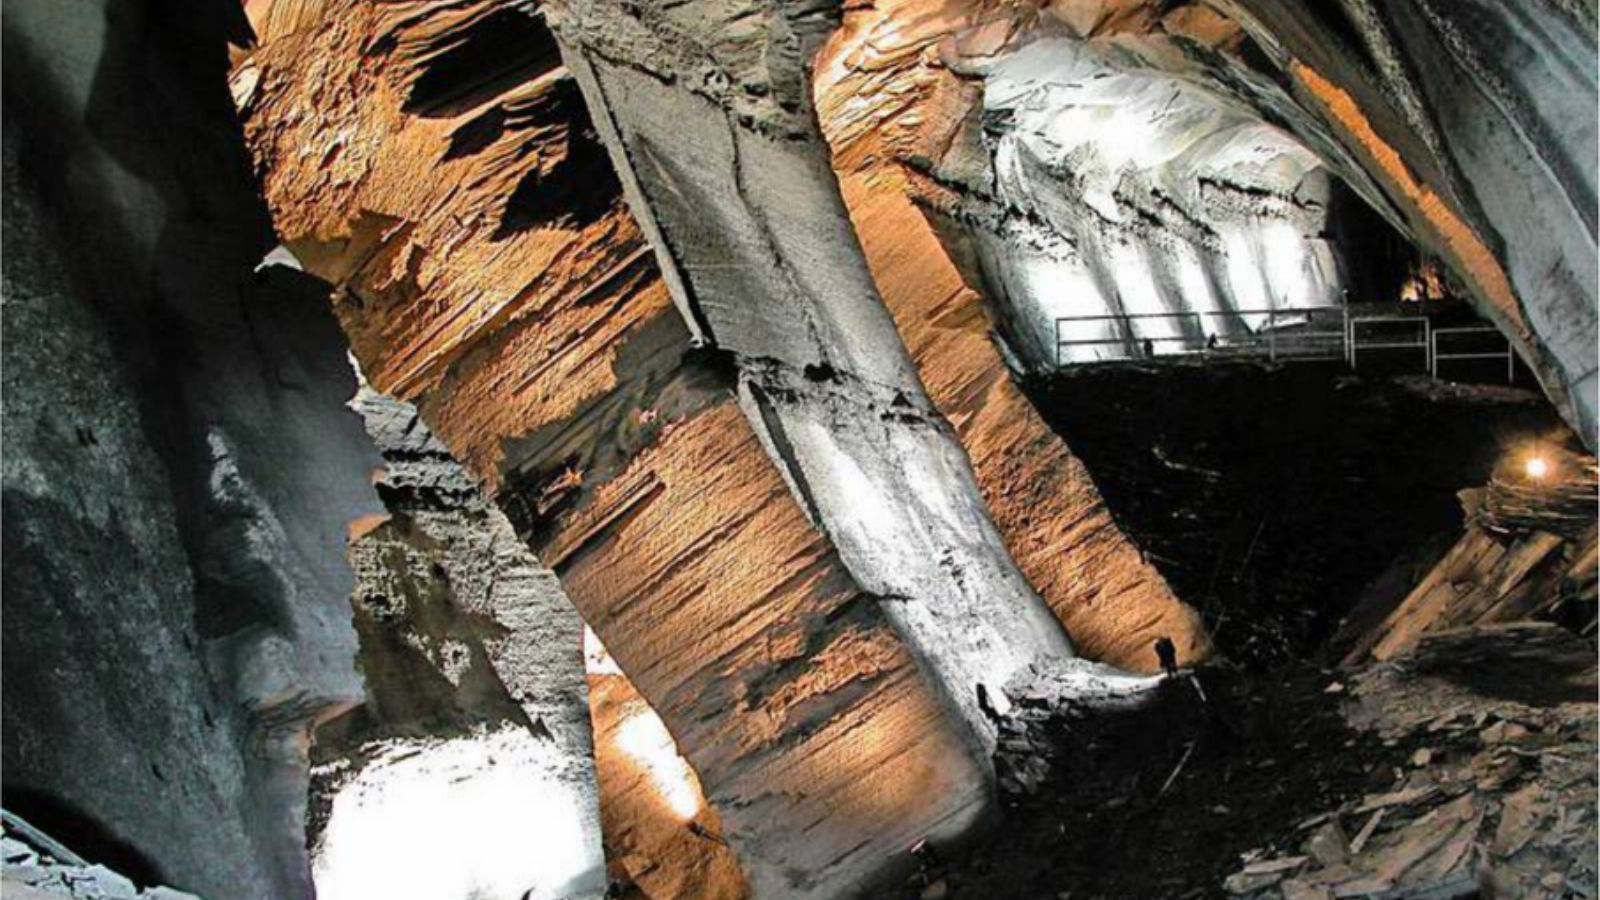 Immerse yourself in the time of slate mining